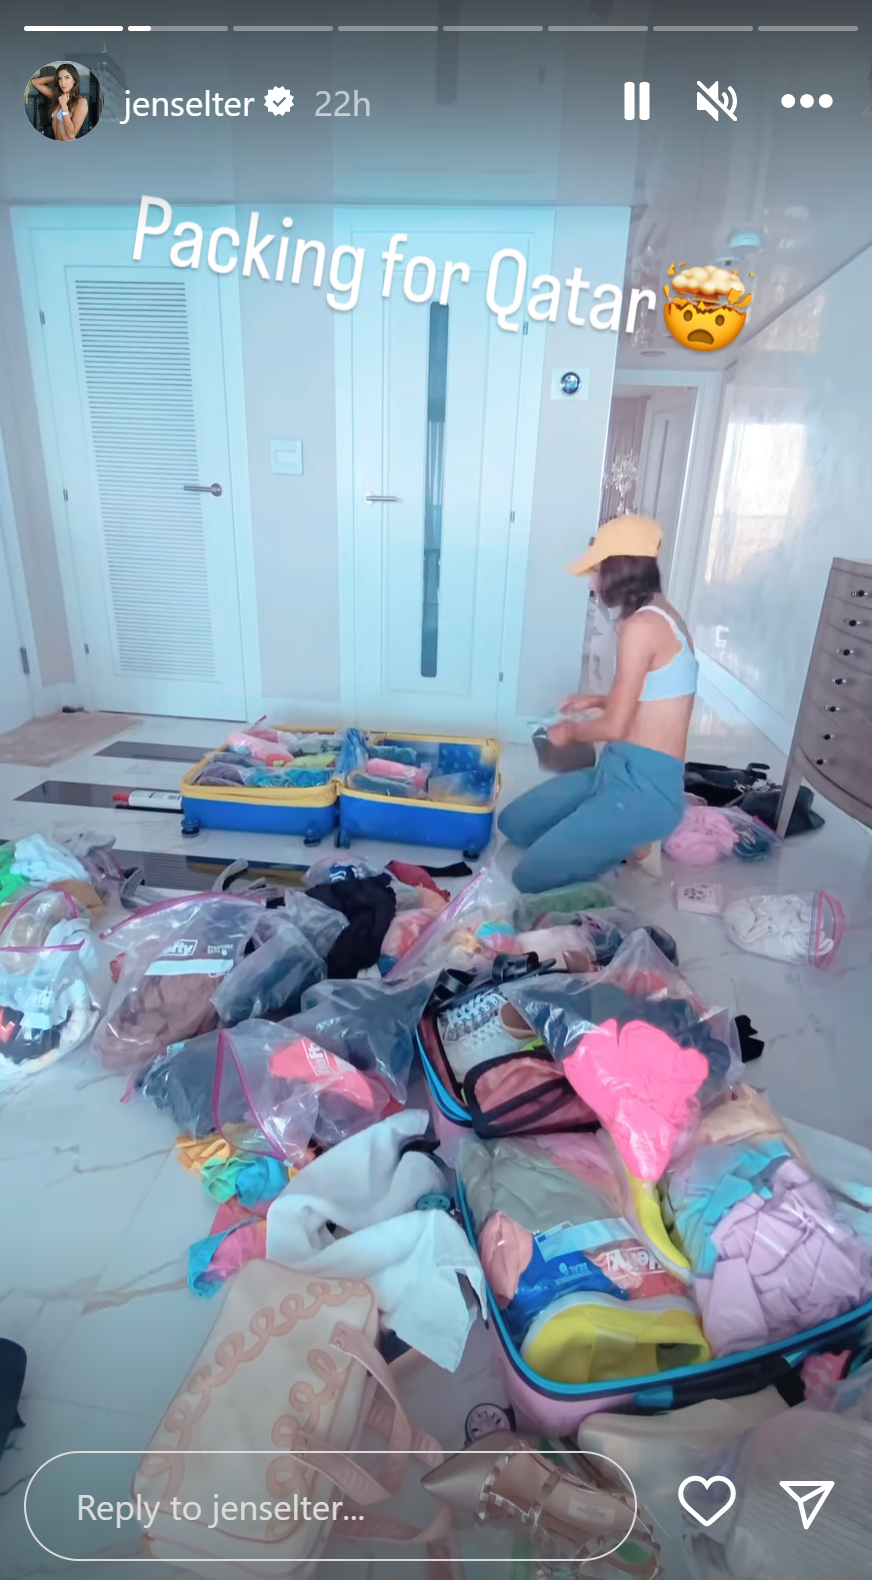 Jen Selter packing for Qatar